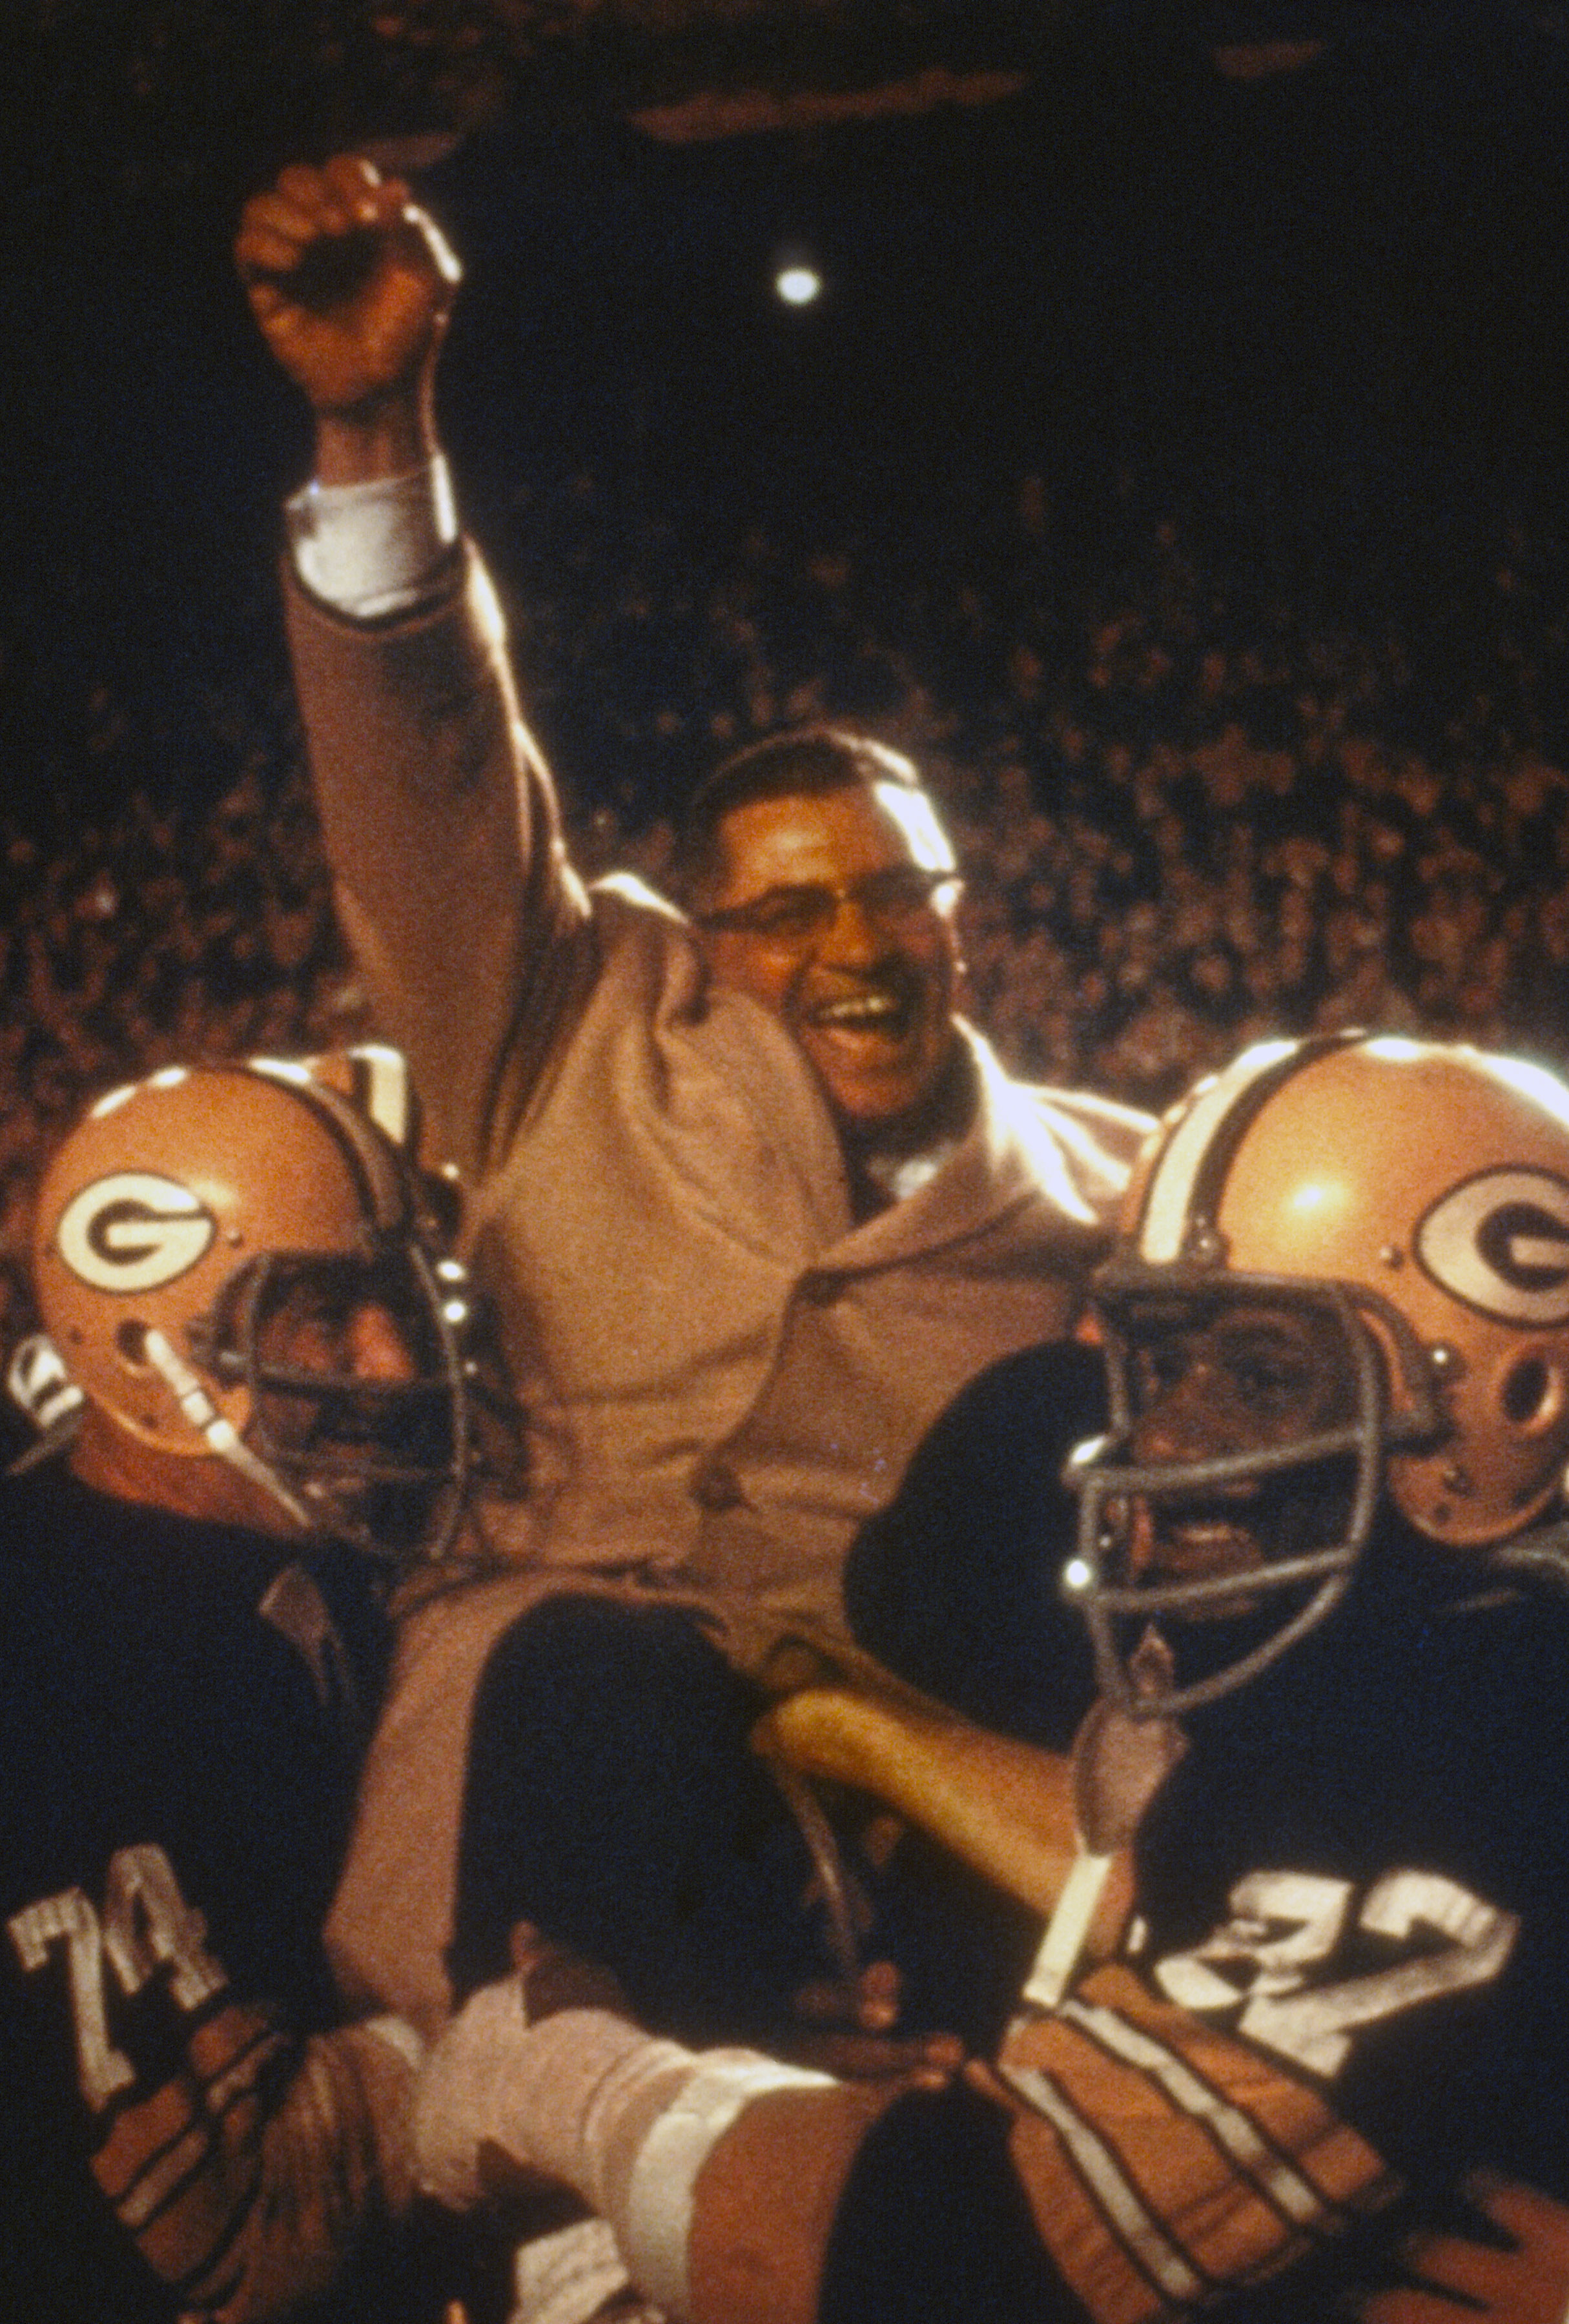 The Green Bay Packers holding up Vince Lombardi